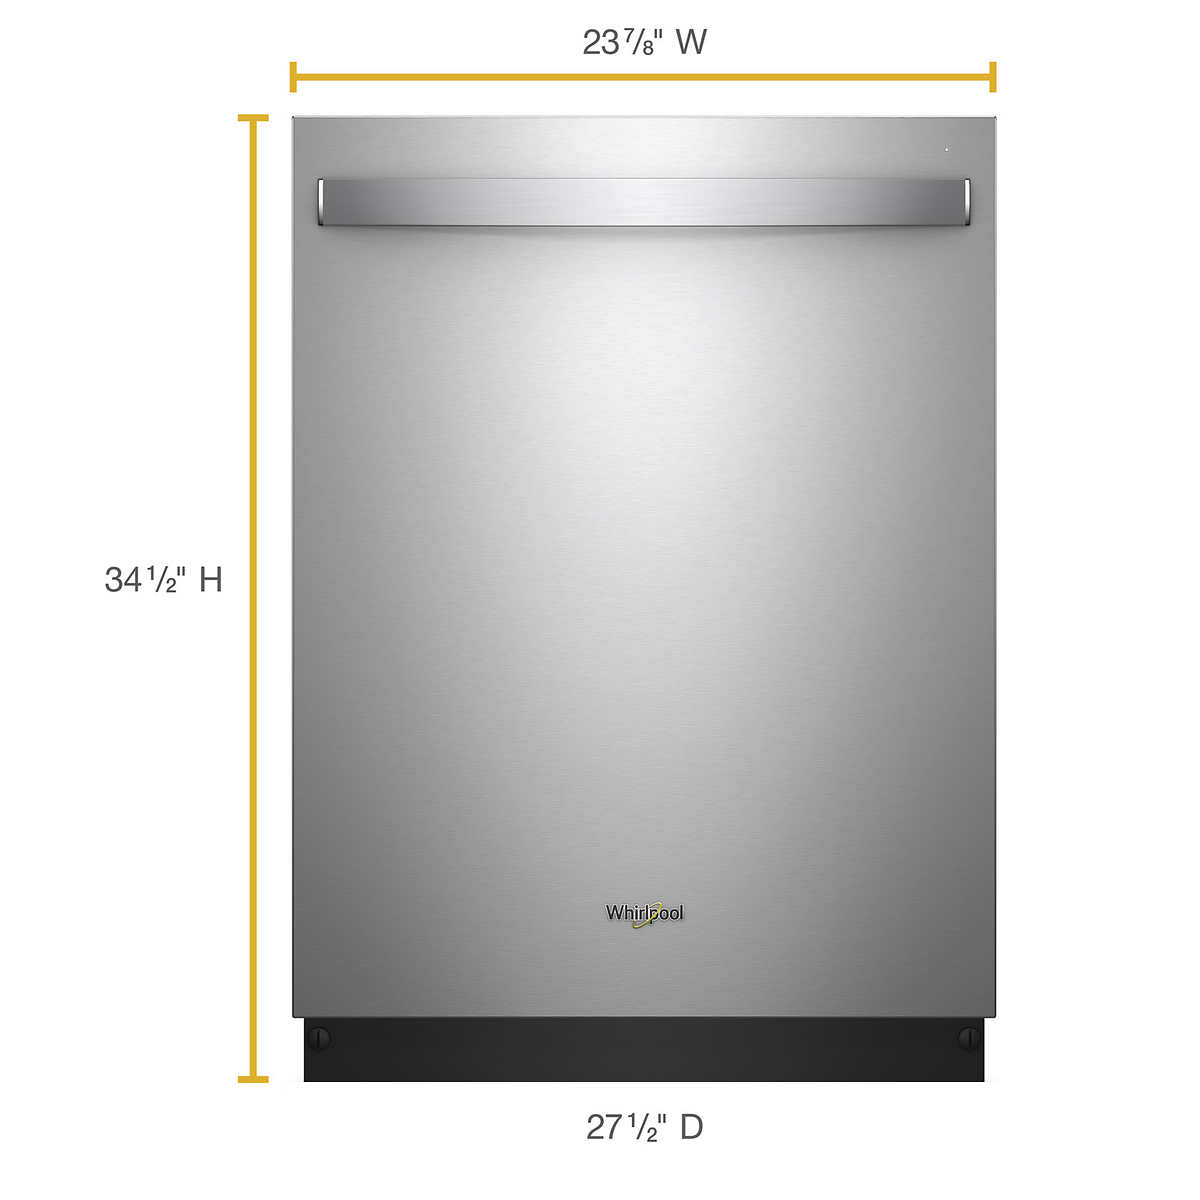 Costco Whirlpool WDT730PAHZ dishwasher $299.97 YMMV in warehouse only